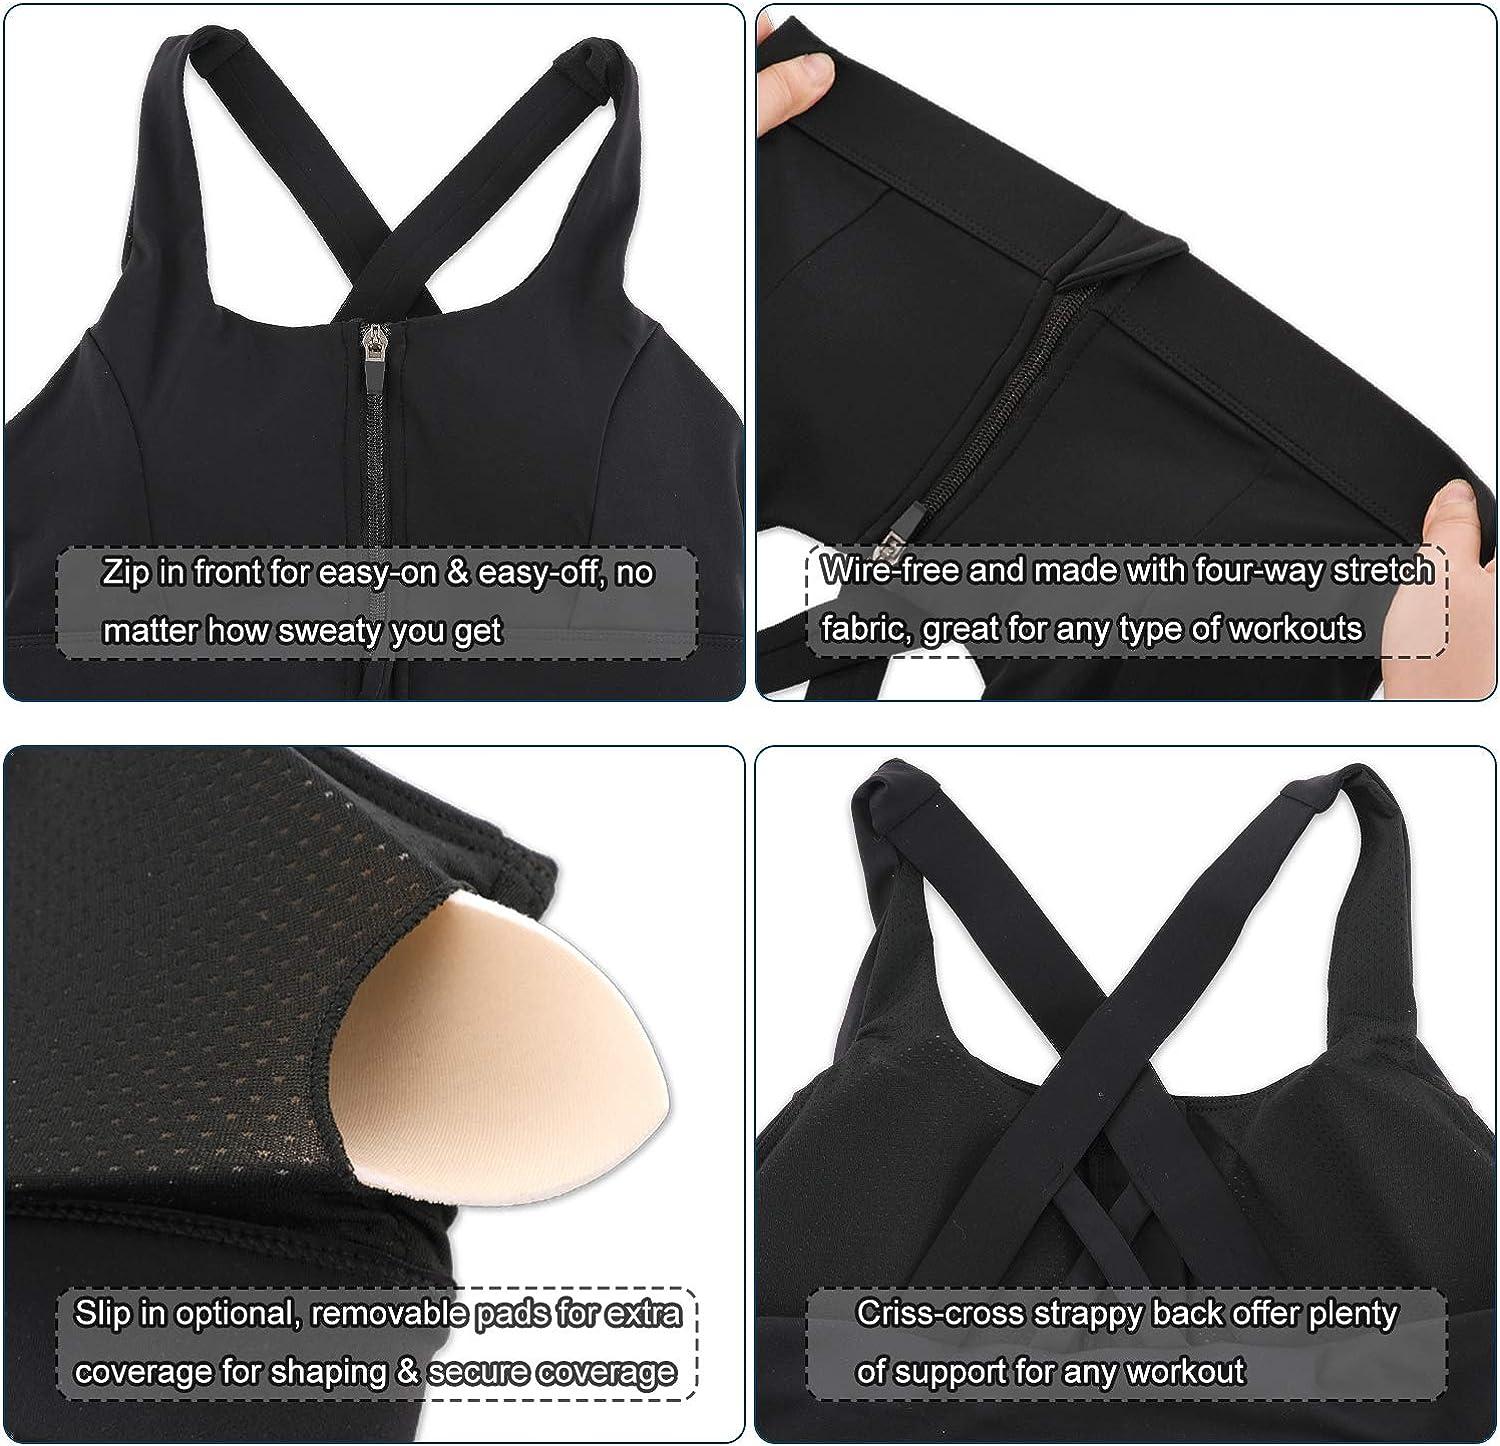 High Impact Sports Bras for Women for Large Bust Tank Wirefree